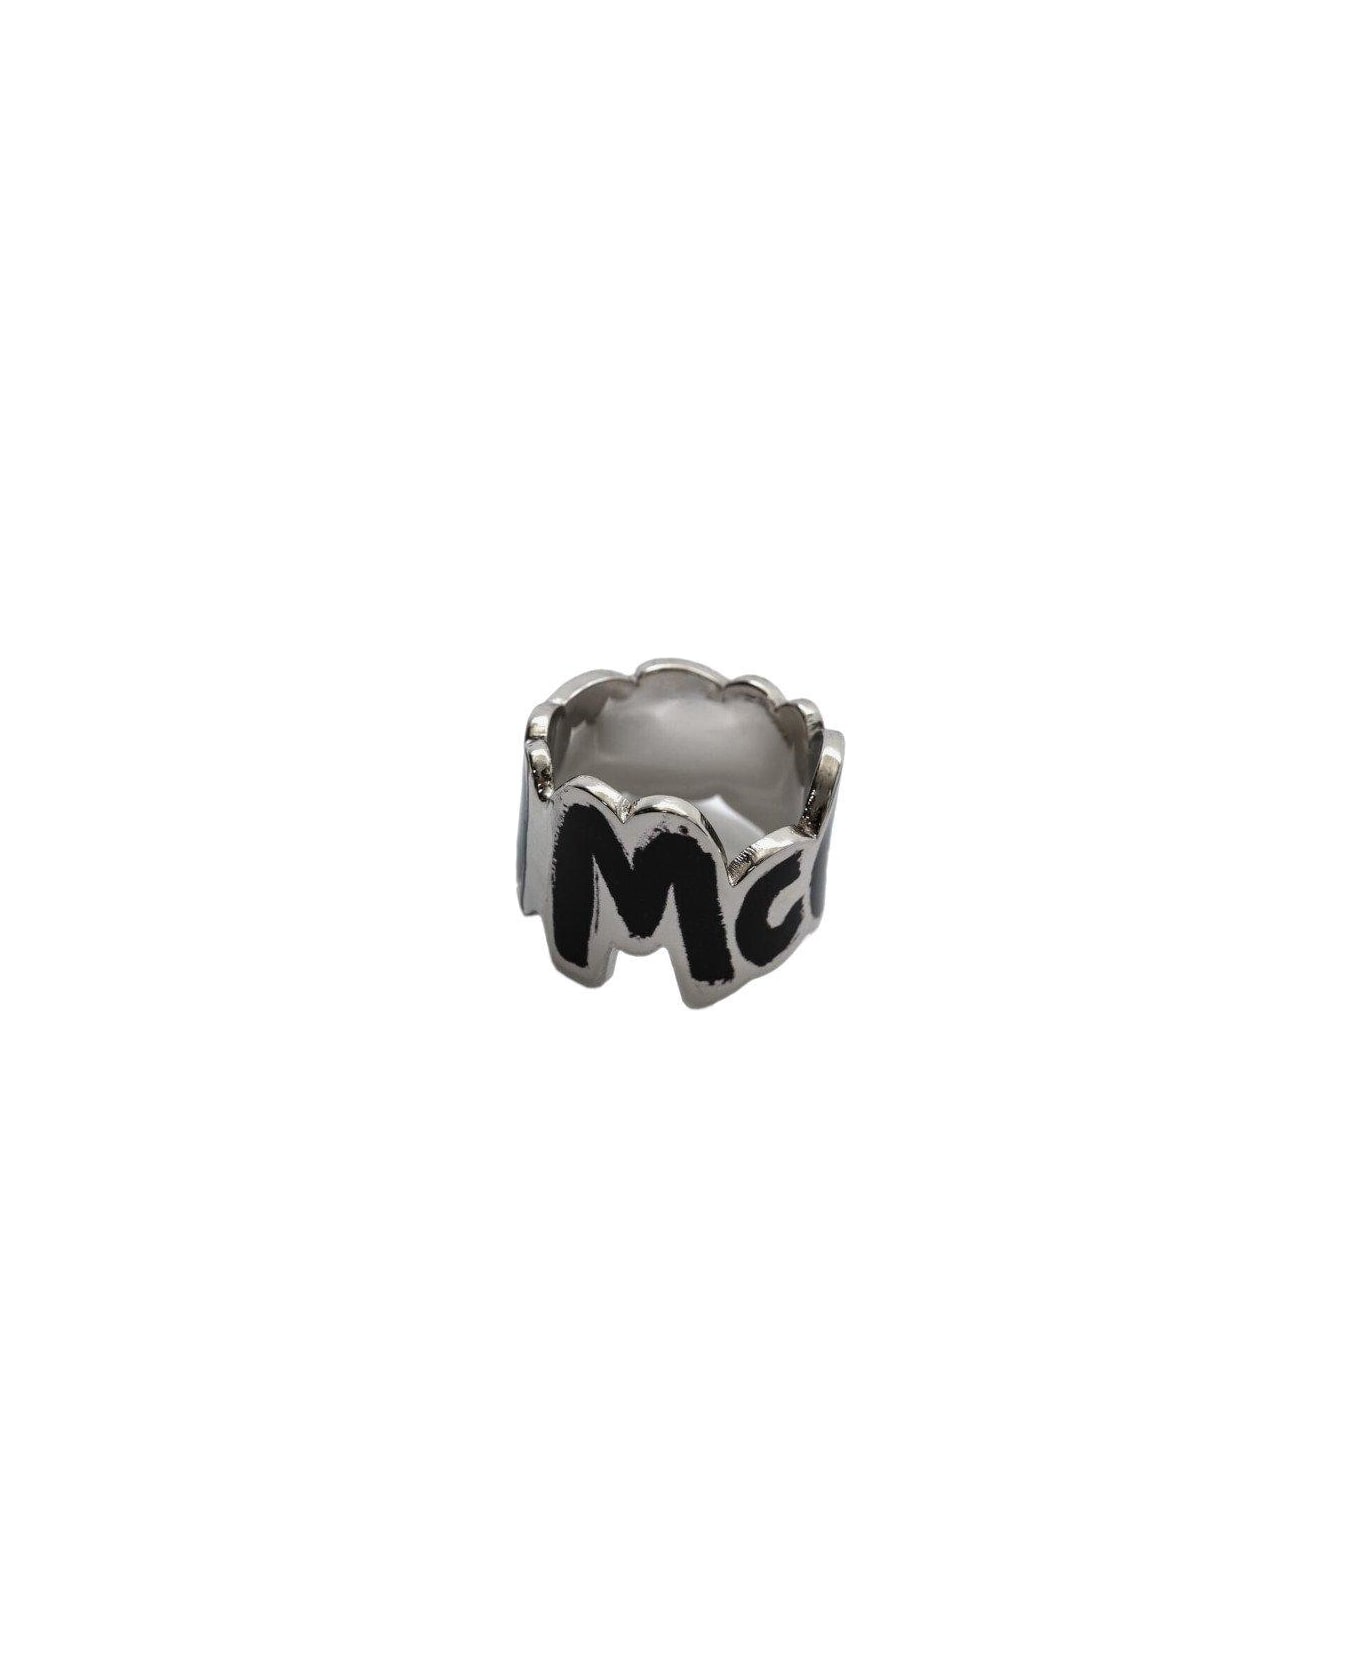 Alexander McQueen Logo Engraved Cut Out Ring - Nero リング